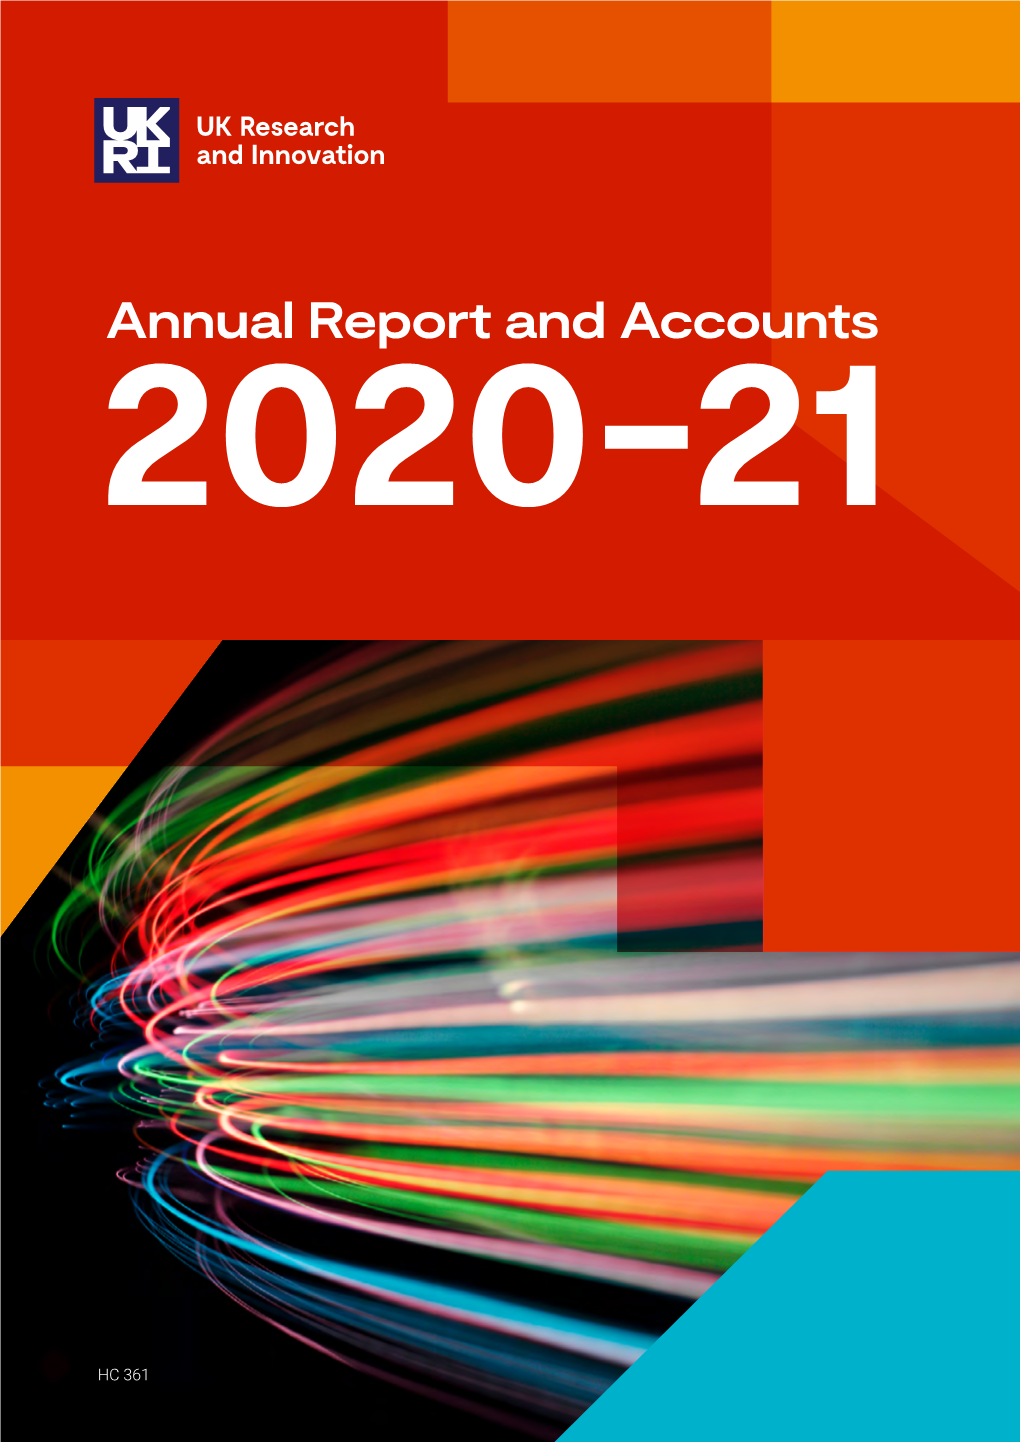 Annual Report and Accounts 2020-21